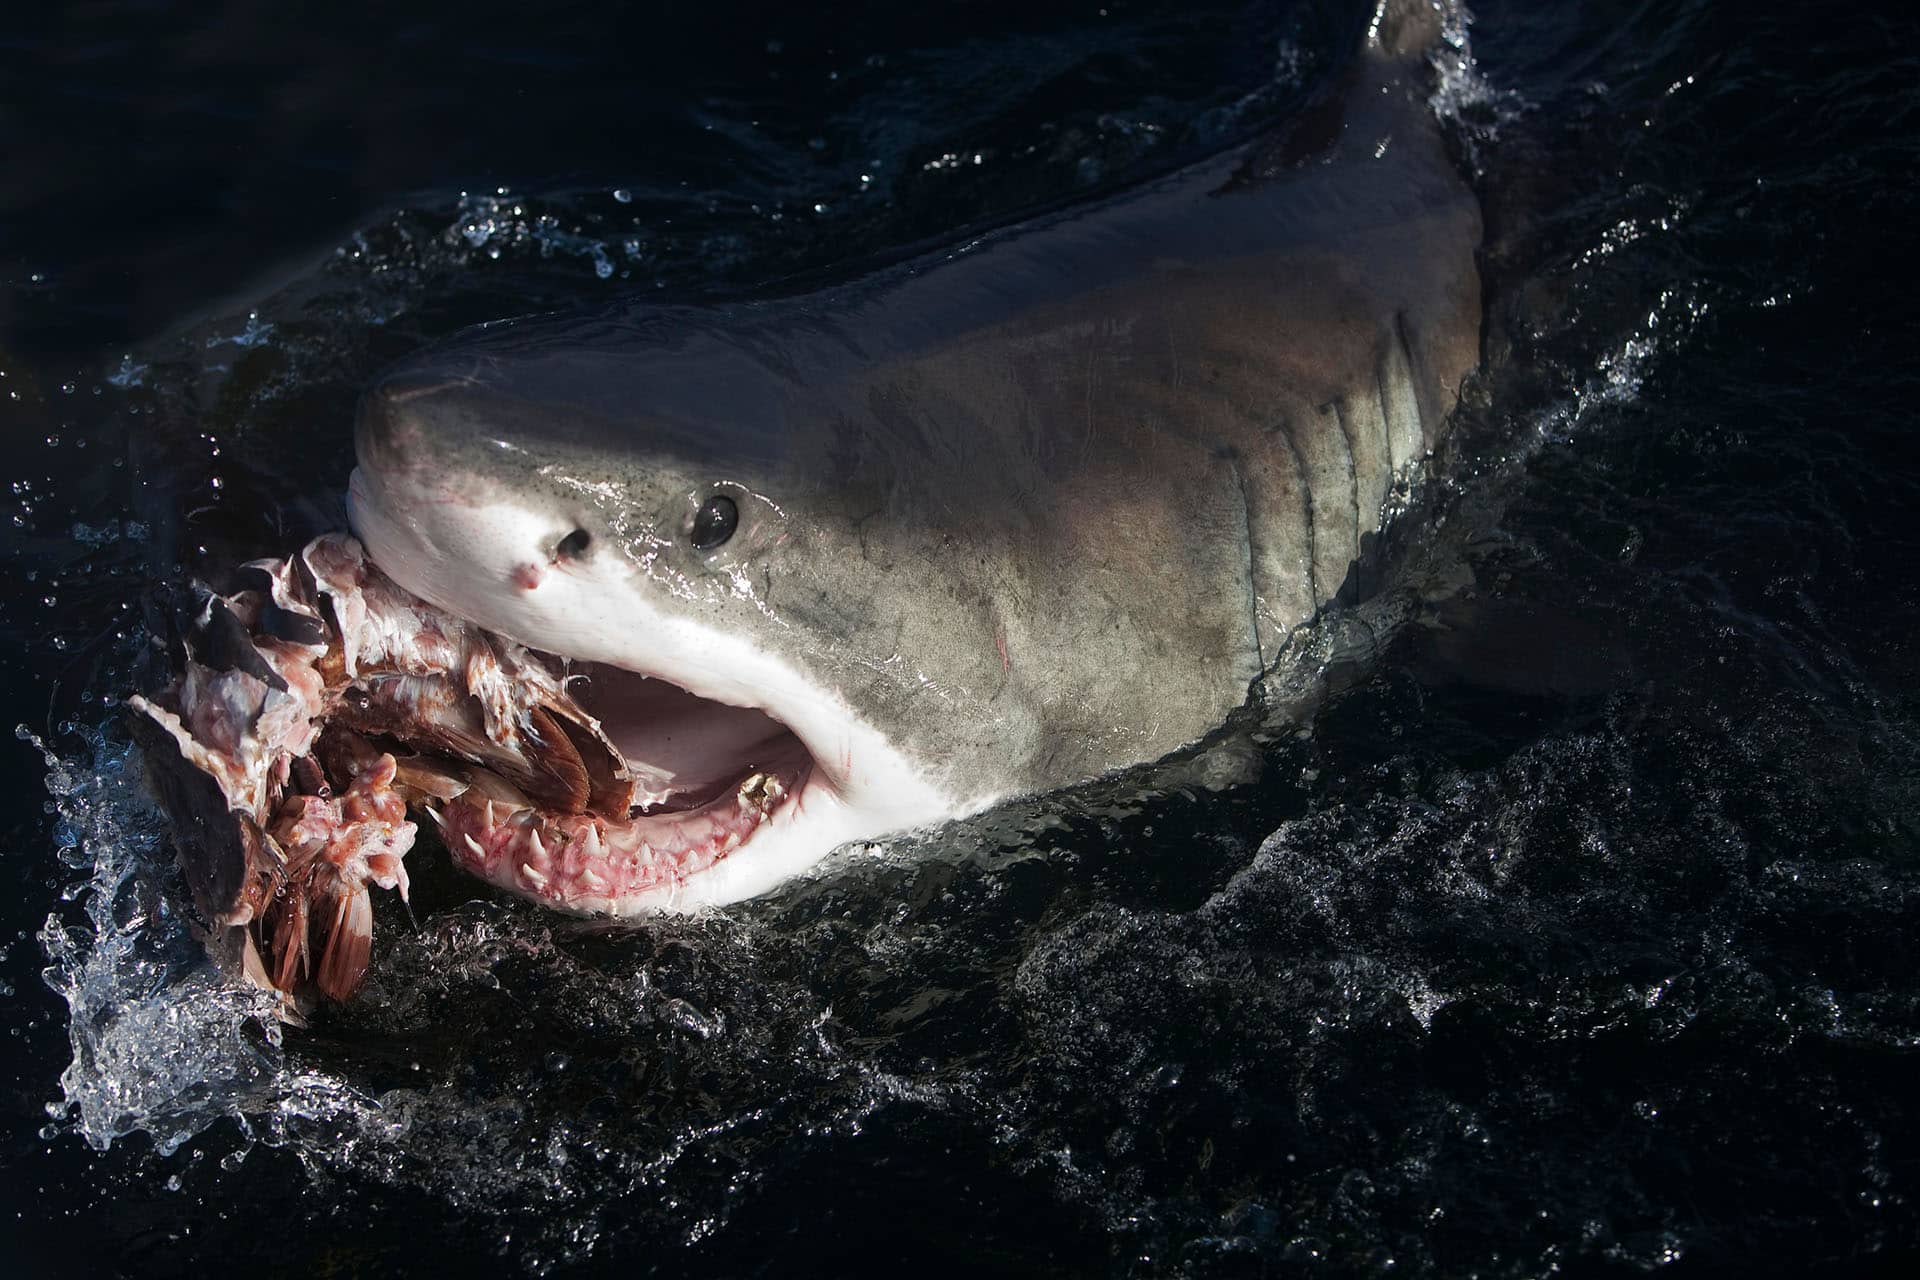 A great white shark feeding on the scraps of a carcass – an animal that makes up the Marine Big Five in South Africa.